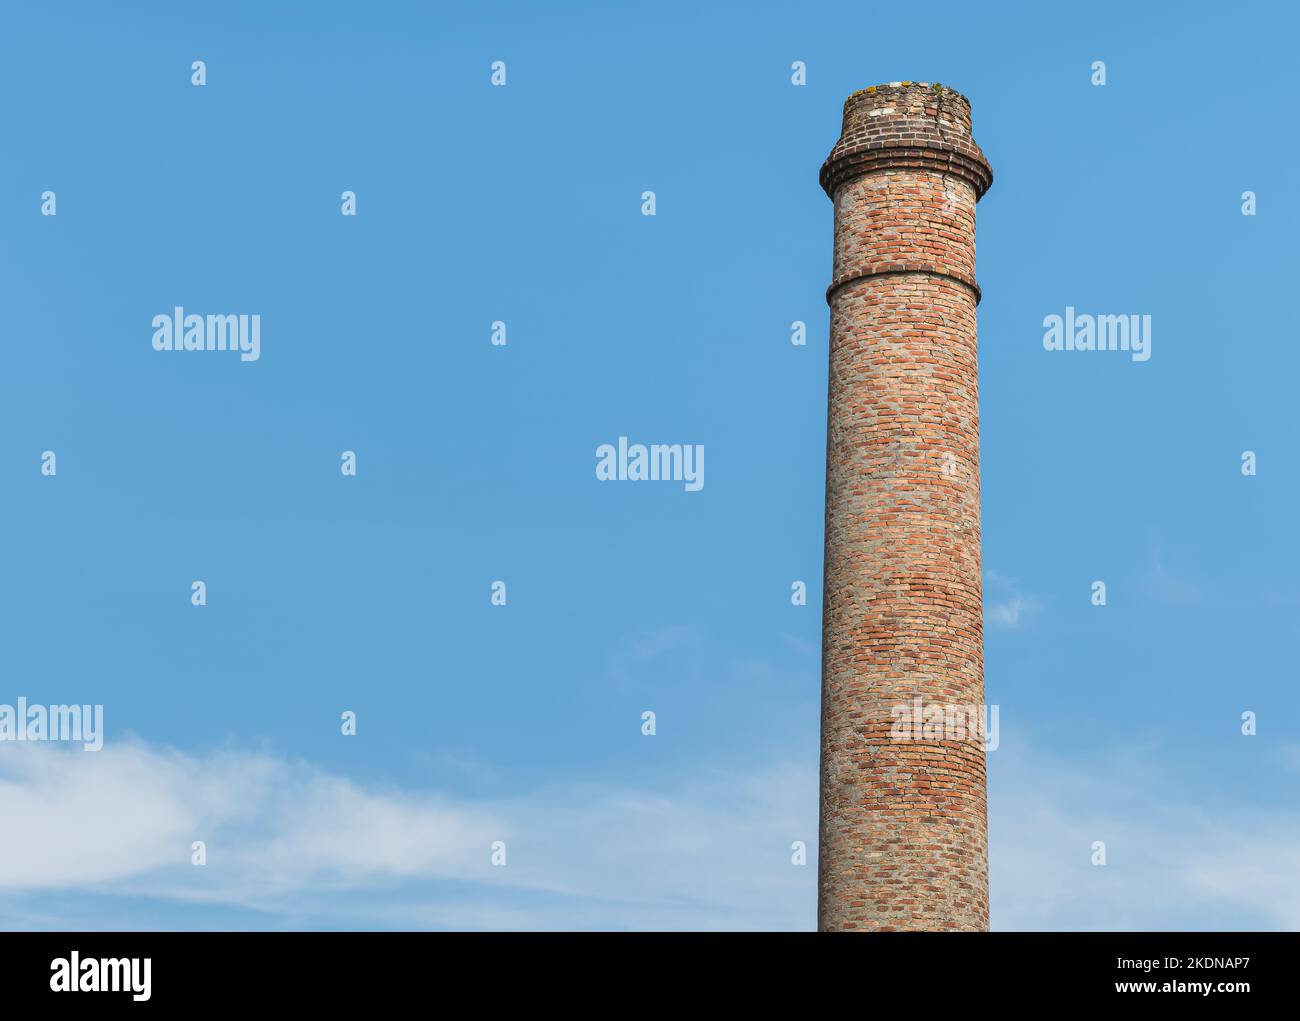 old abandoned fireplace made with red bricks on blue sky in Spain Stock Photo